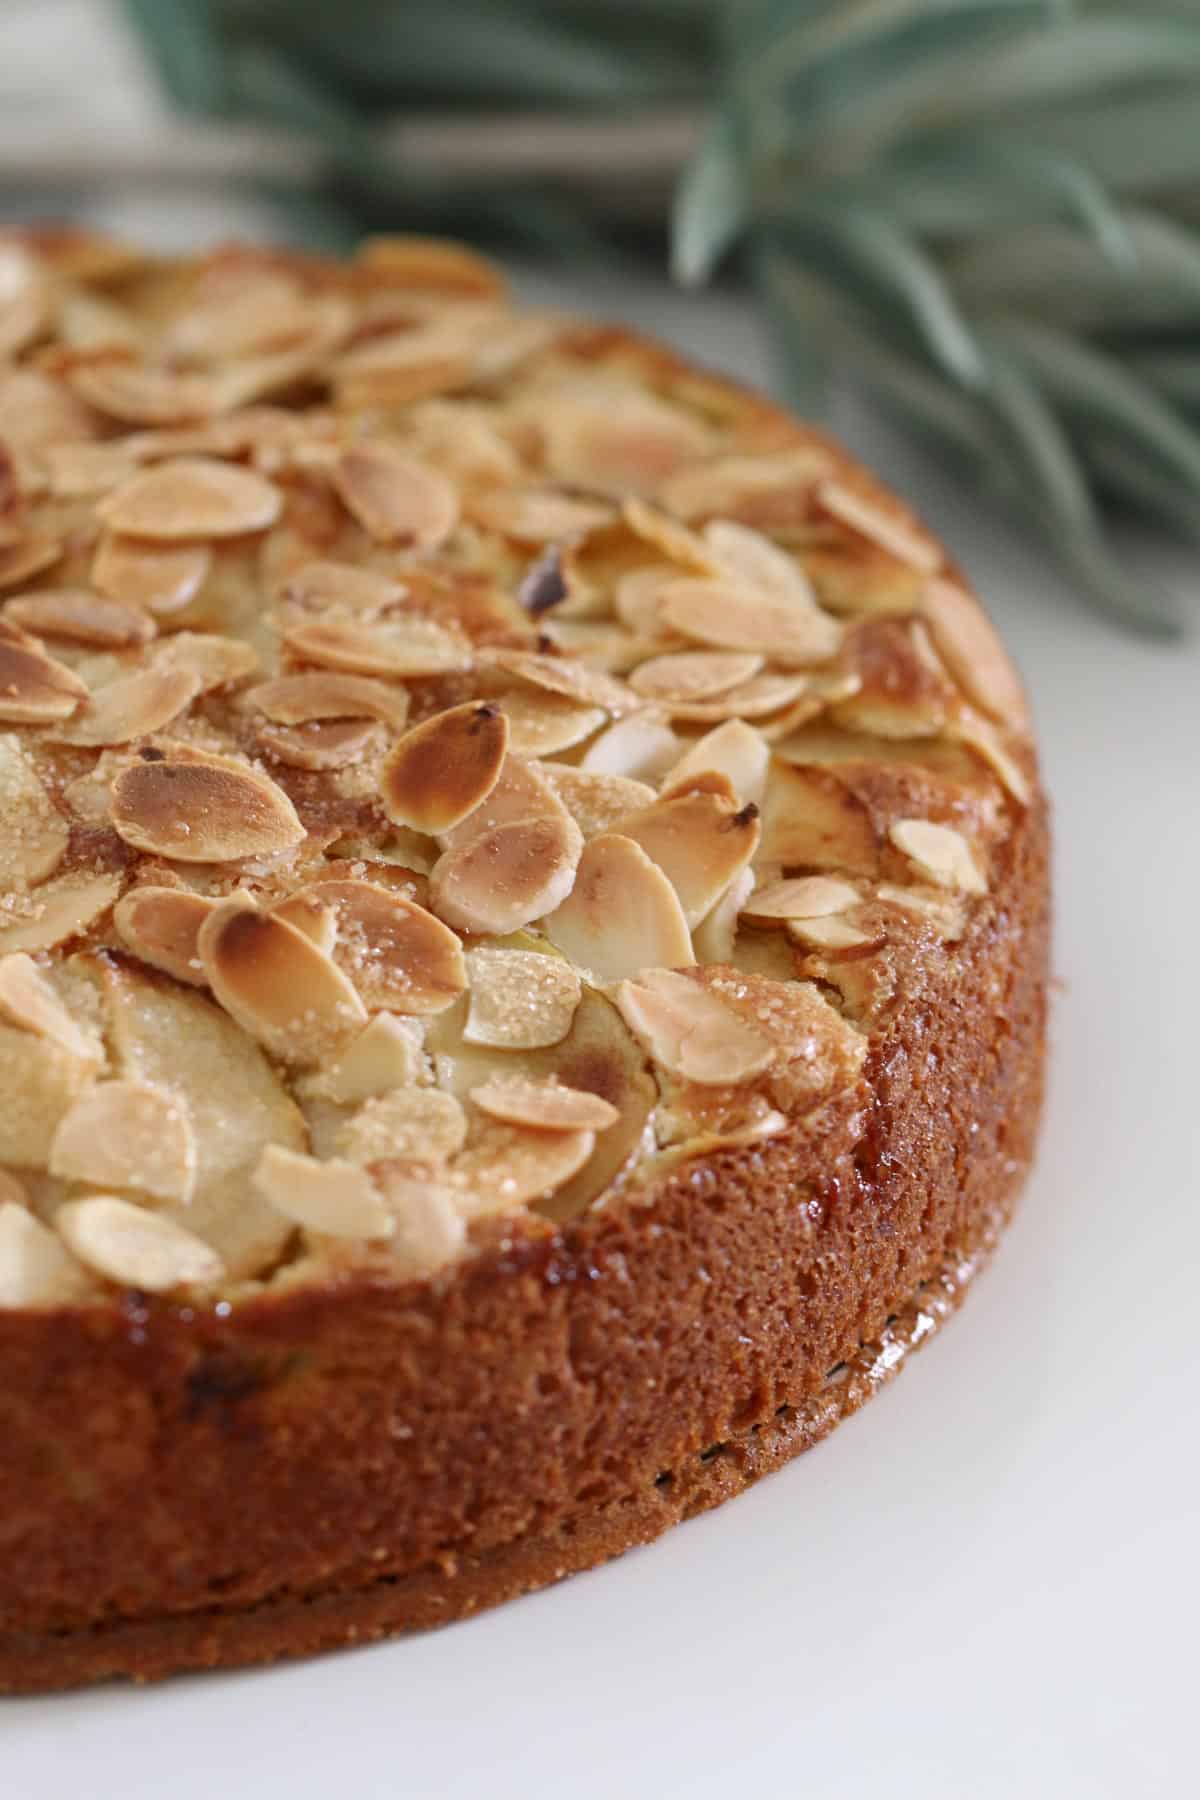 Golden flaked almonds on top of a baked cake.